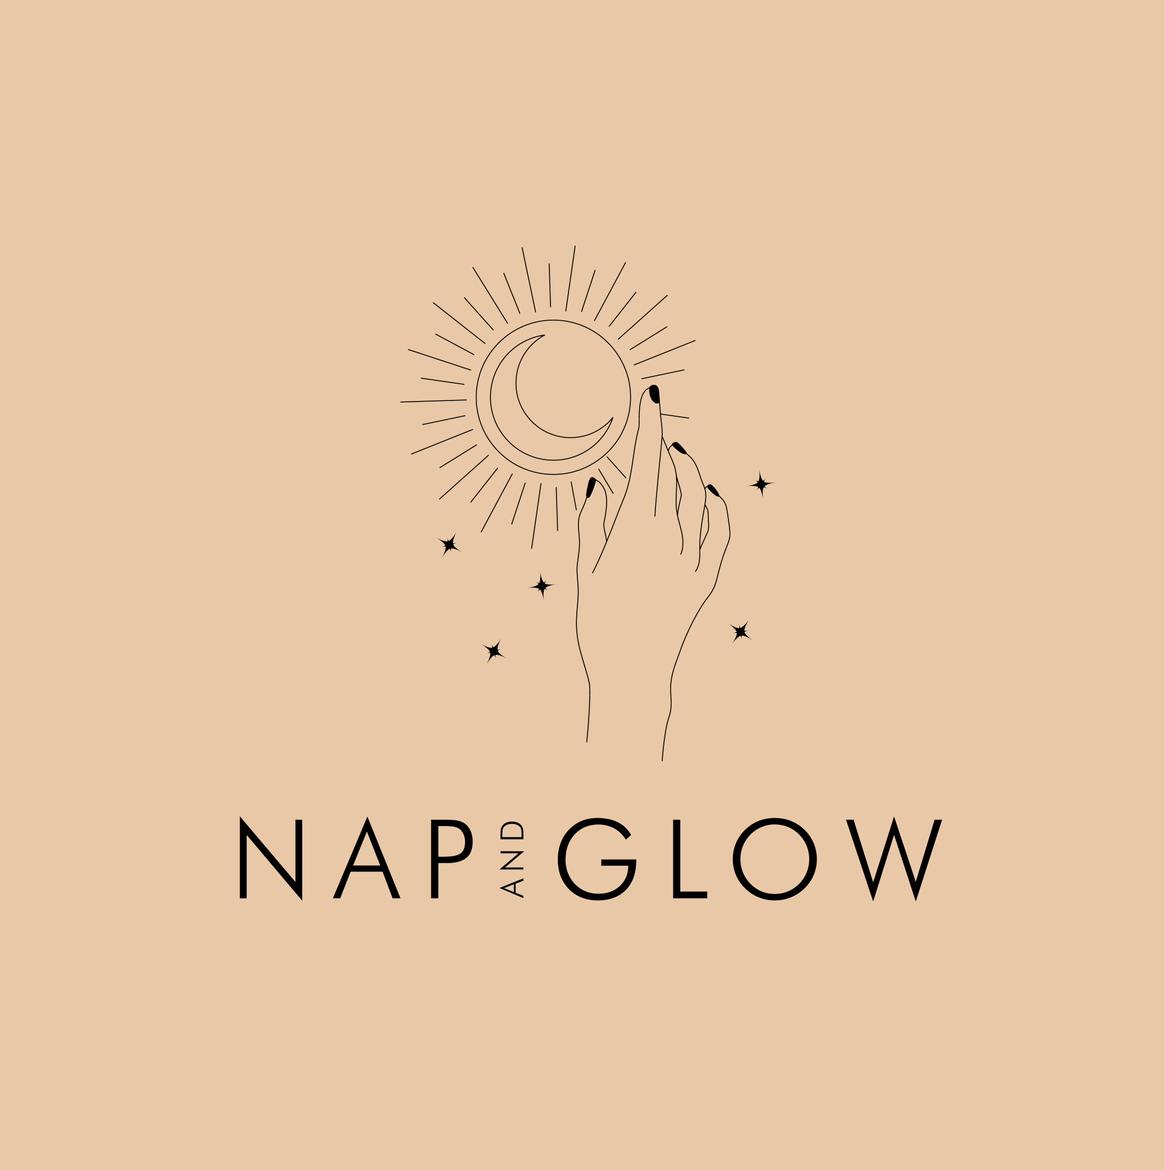 Nap and Glow